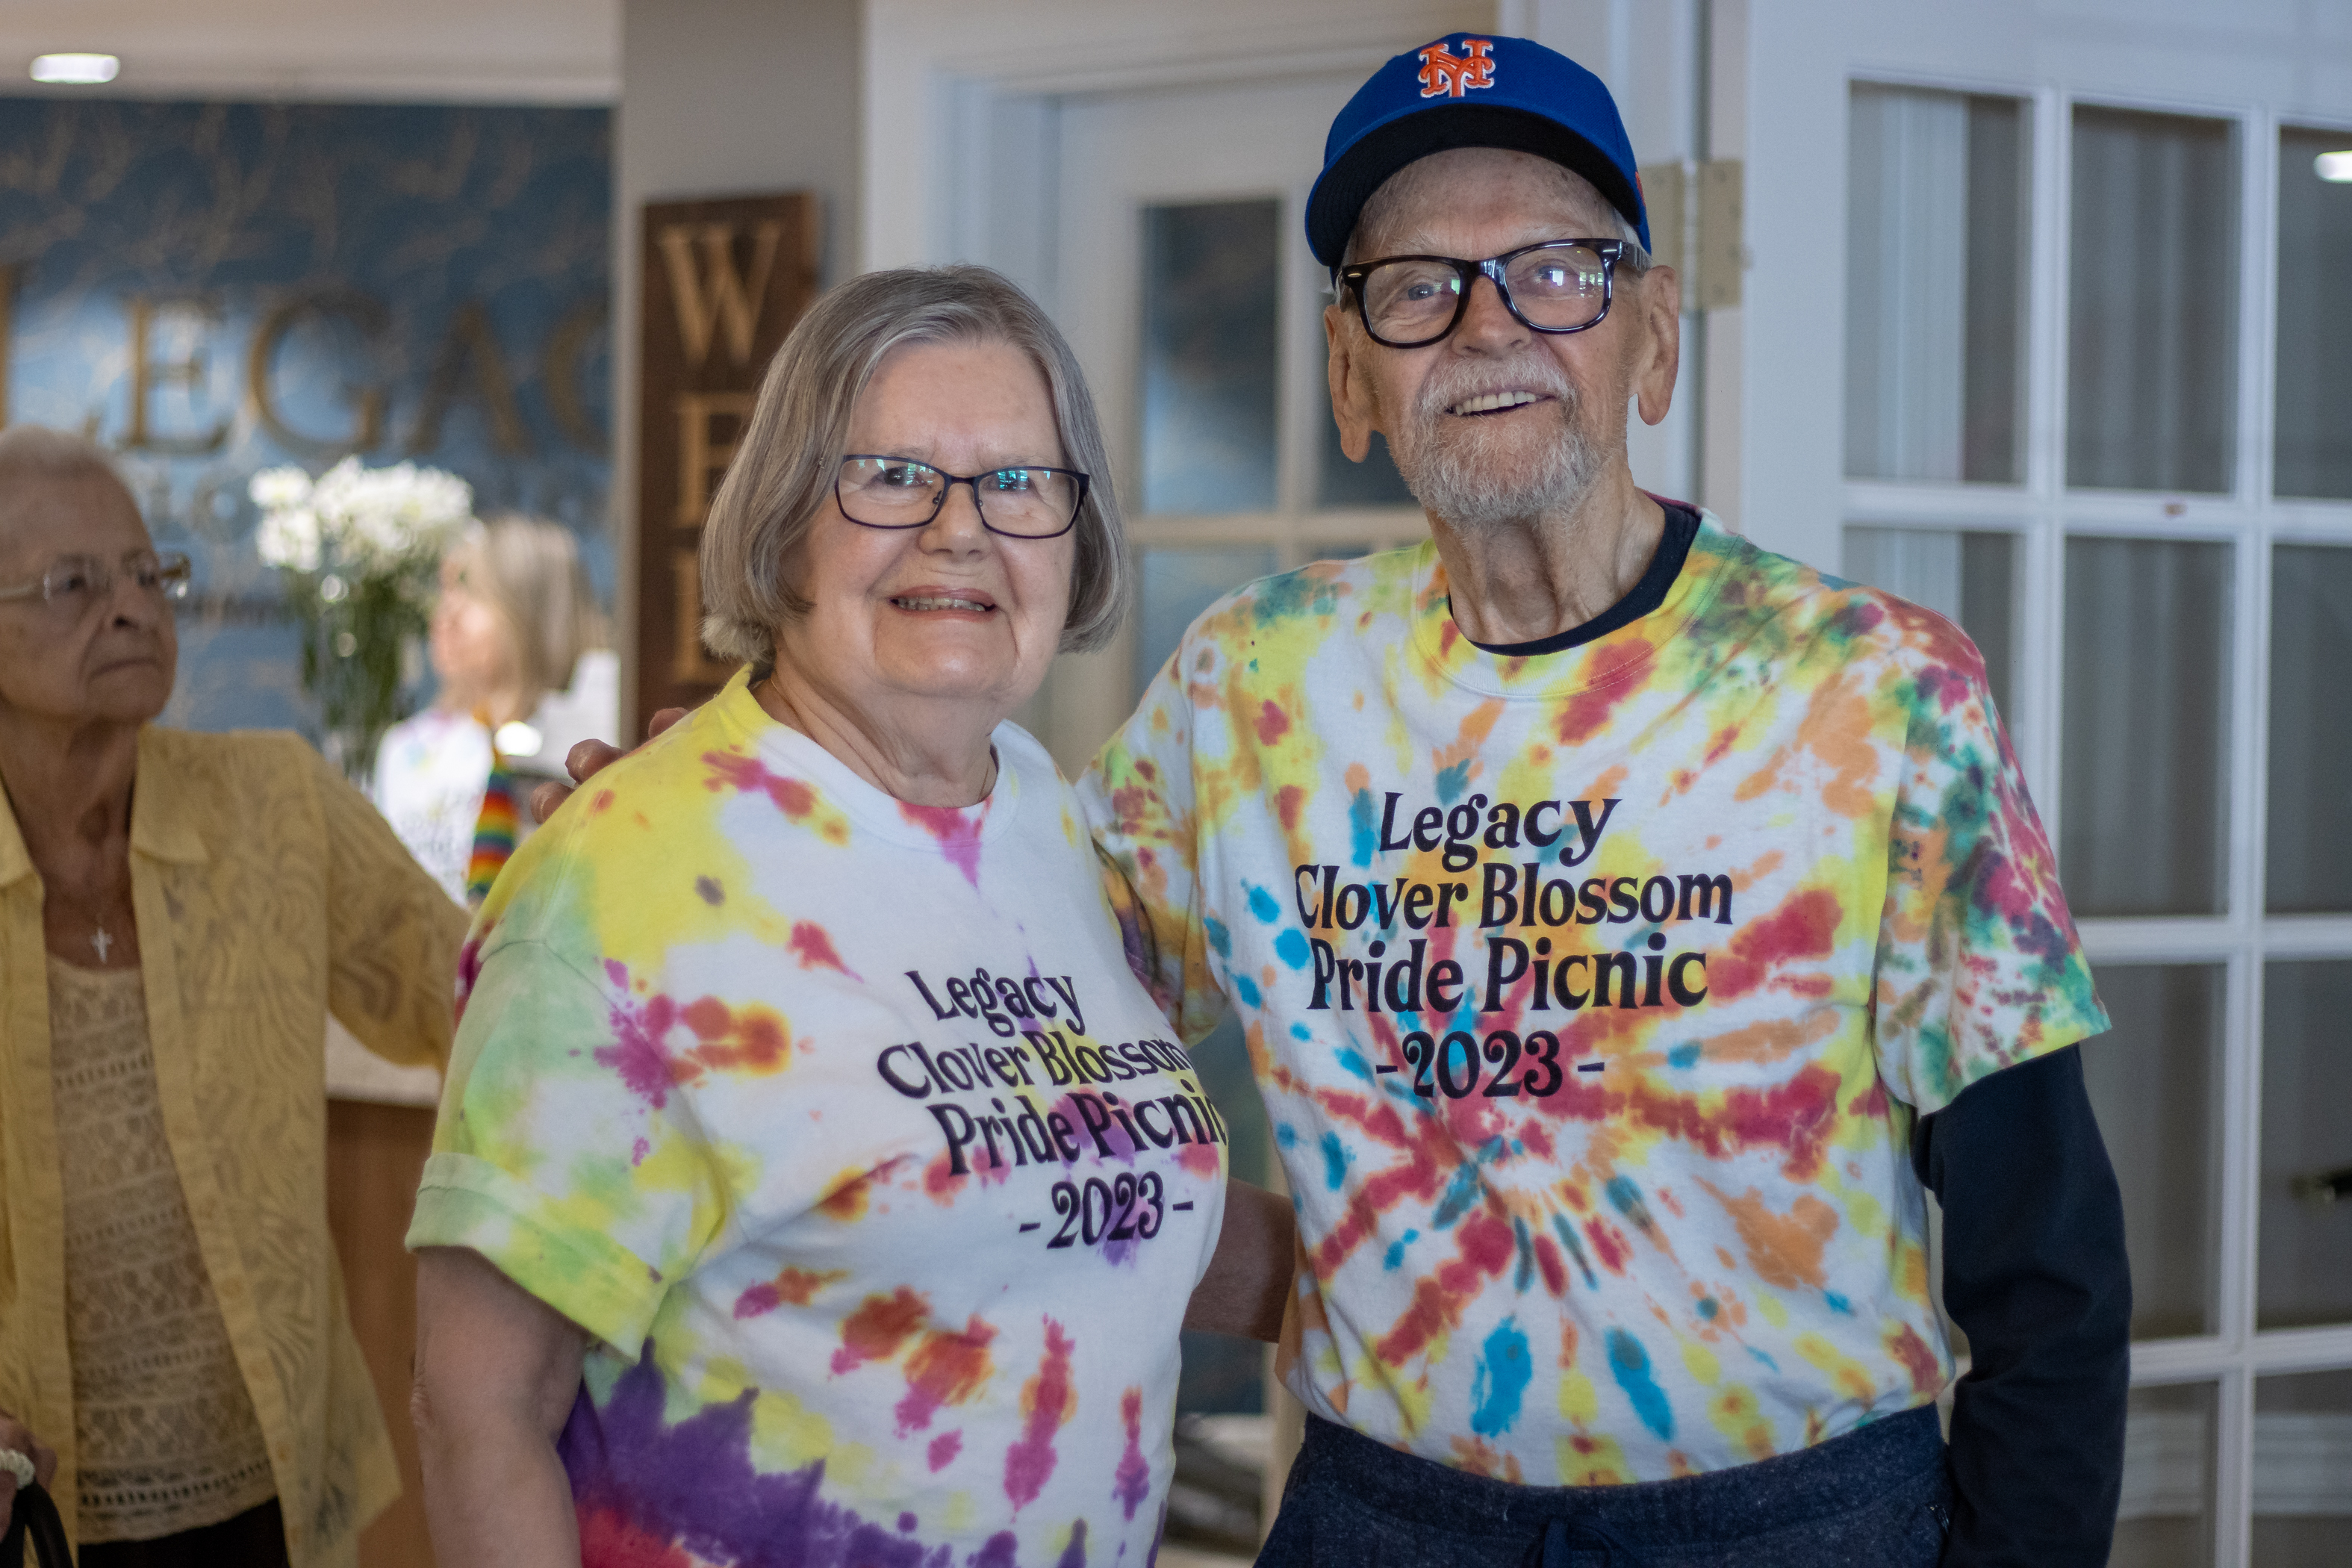 Two residents wearing pride shirts